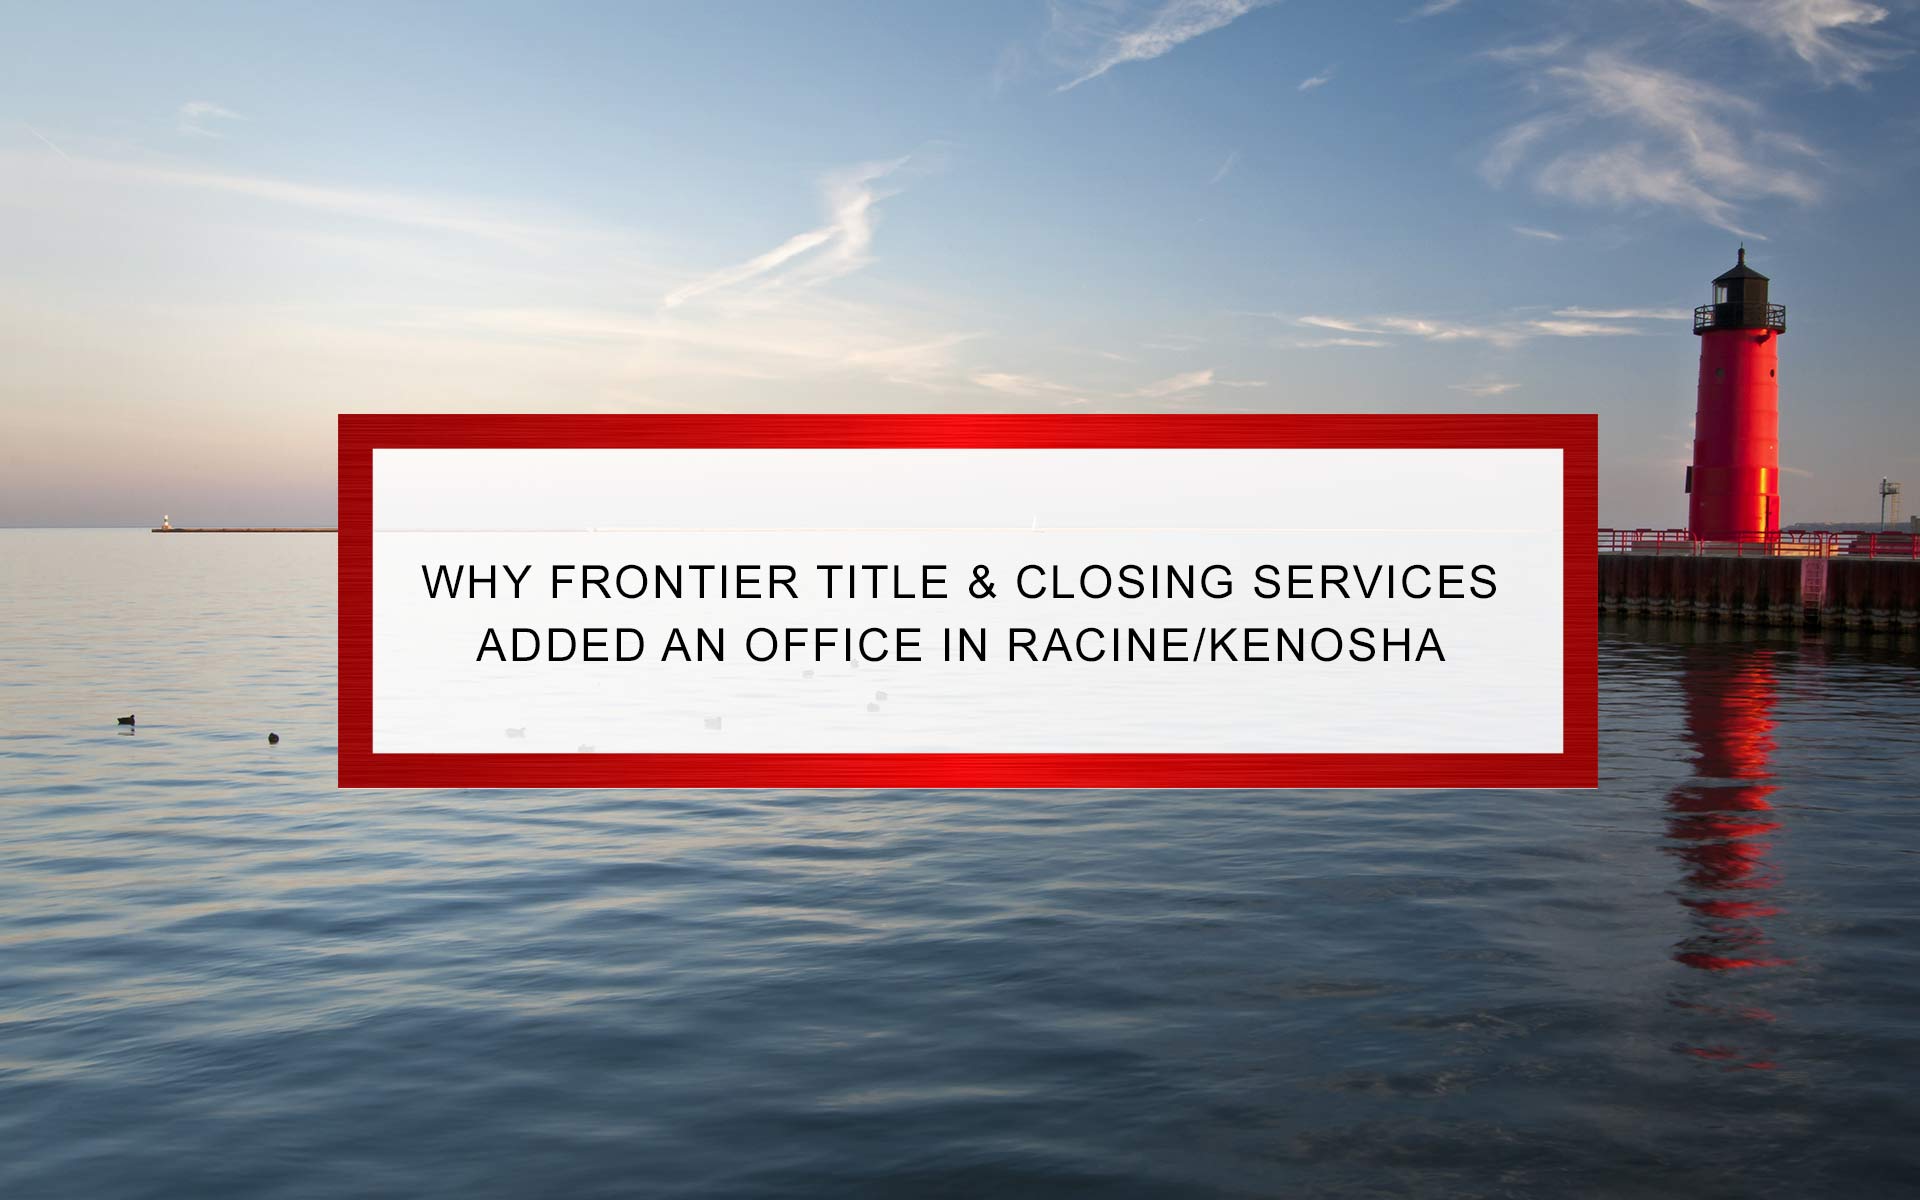 Why Frontier Title & Closing Services Added an Office in Racine/Kenosha | Frontier Title & Closing Services